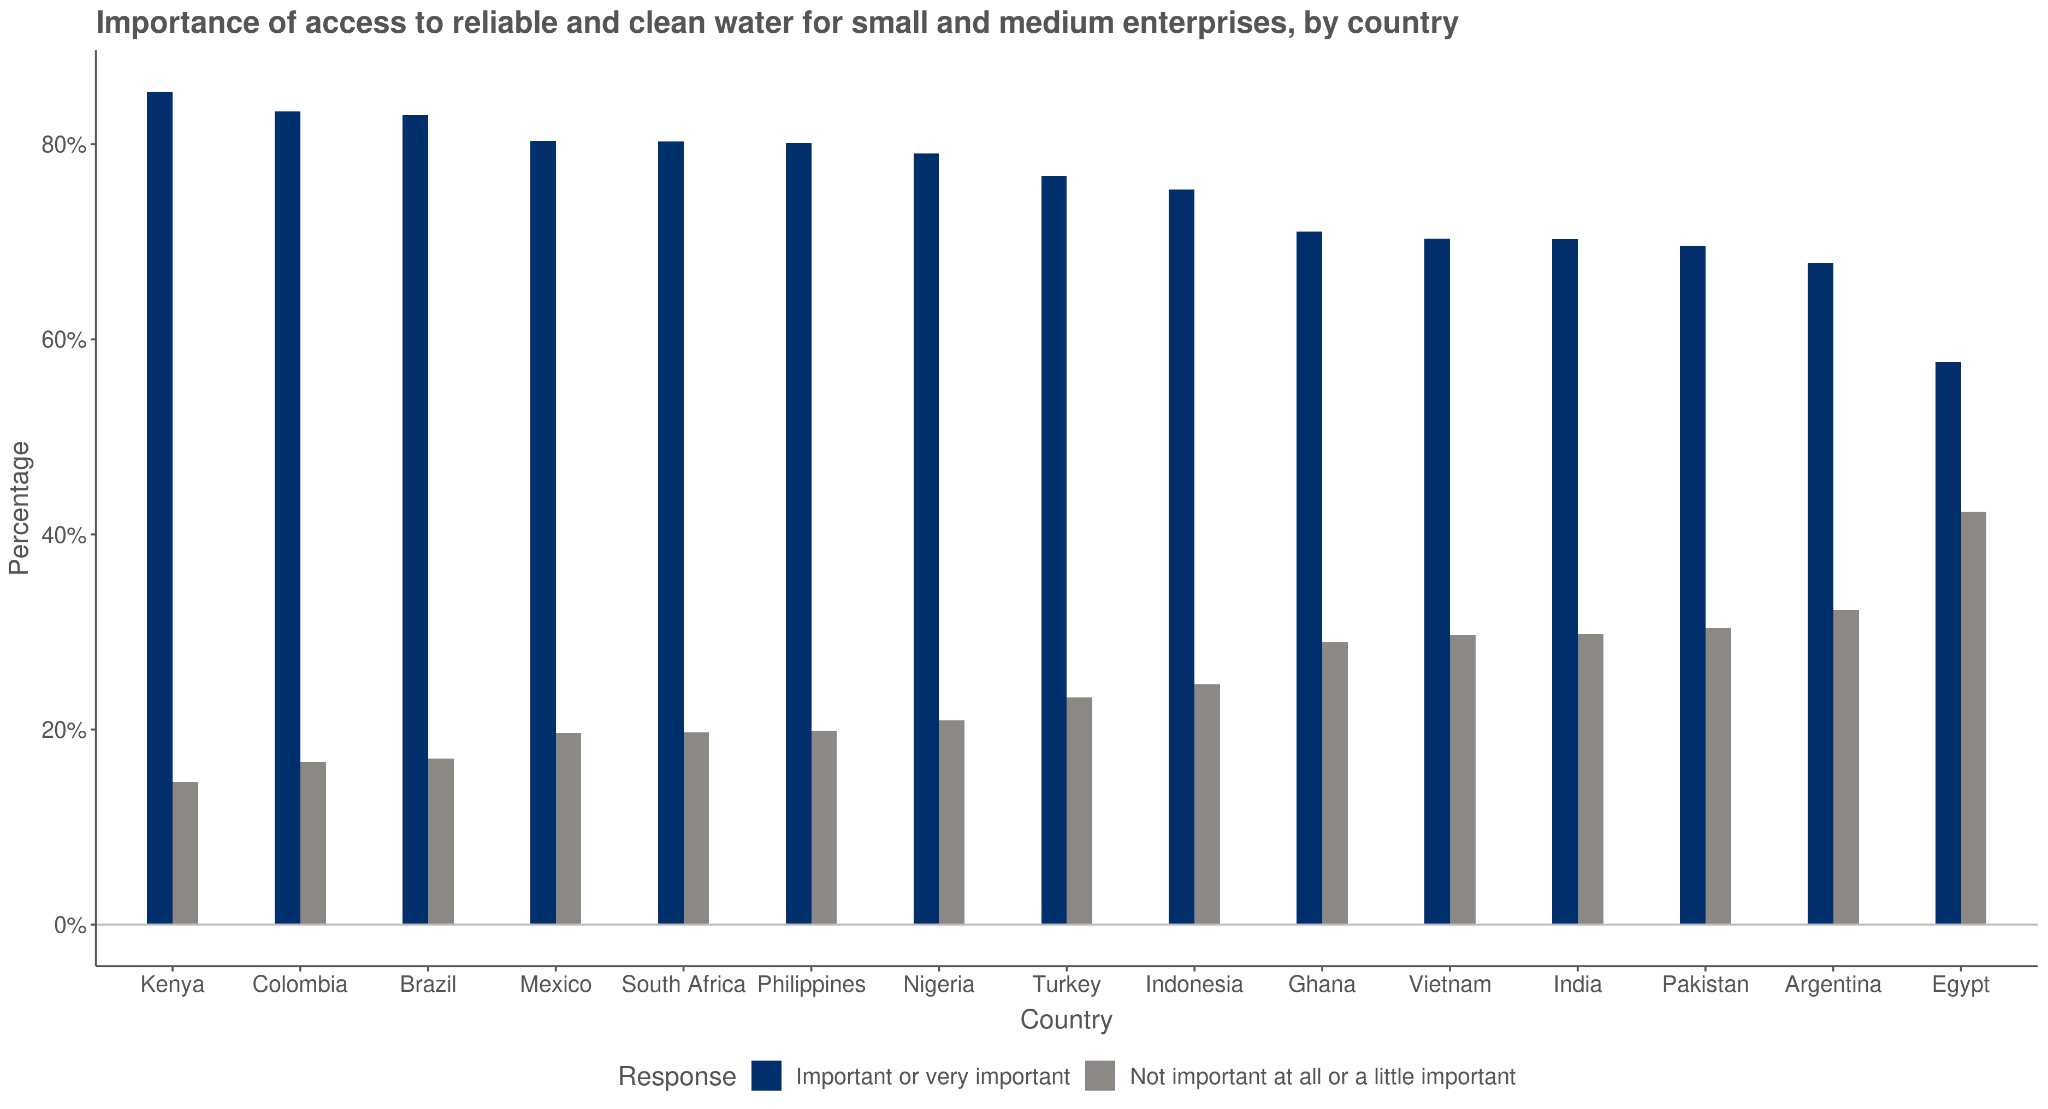 Importance of access to reliable and clean water for small and medium enterprises, by country